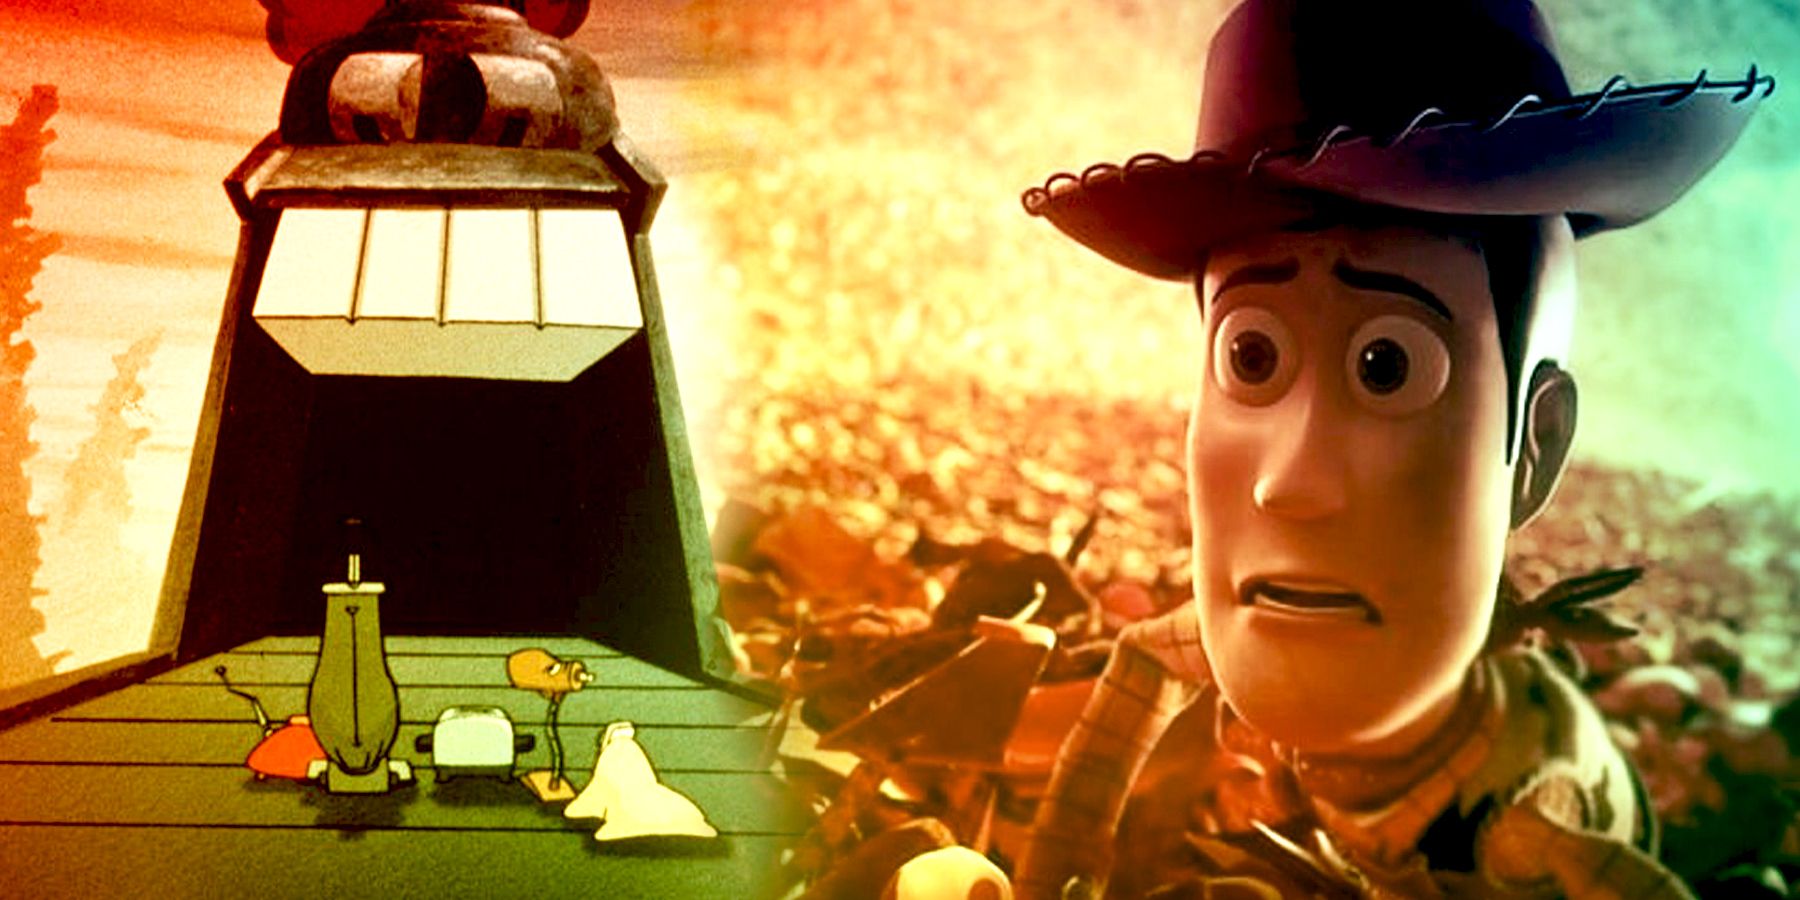 15 Animated Movies That Don't Have Happy Endings